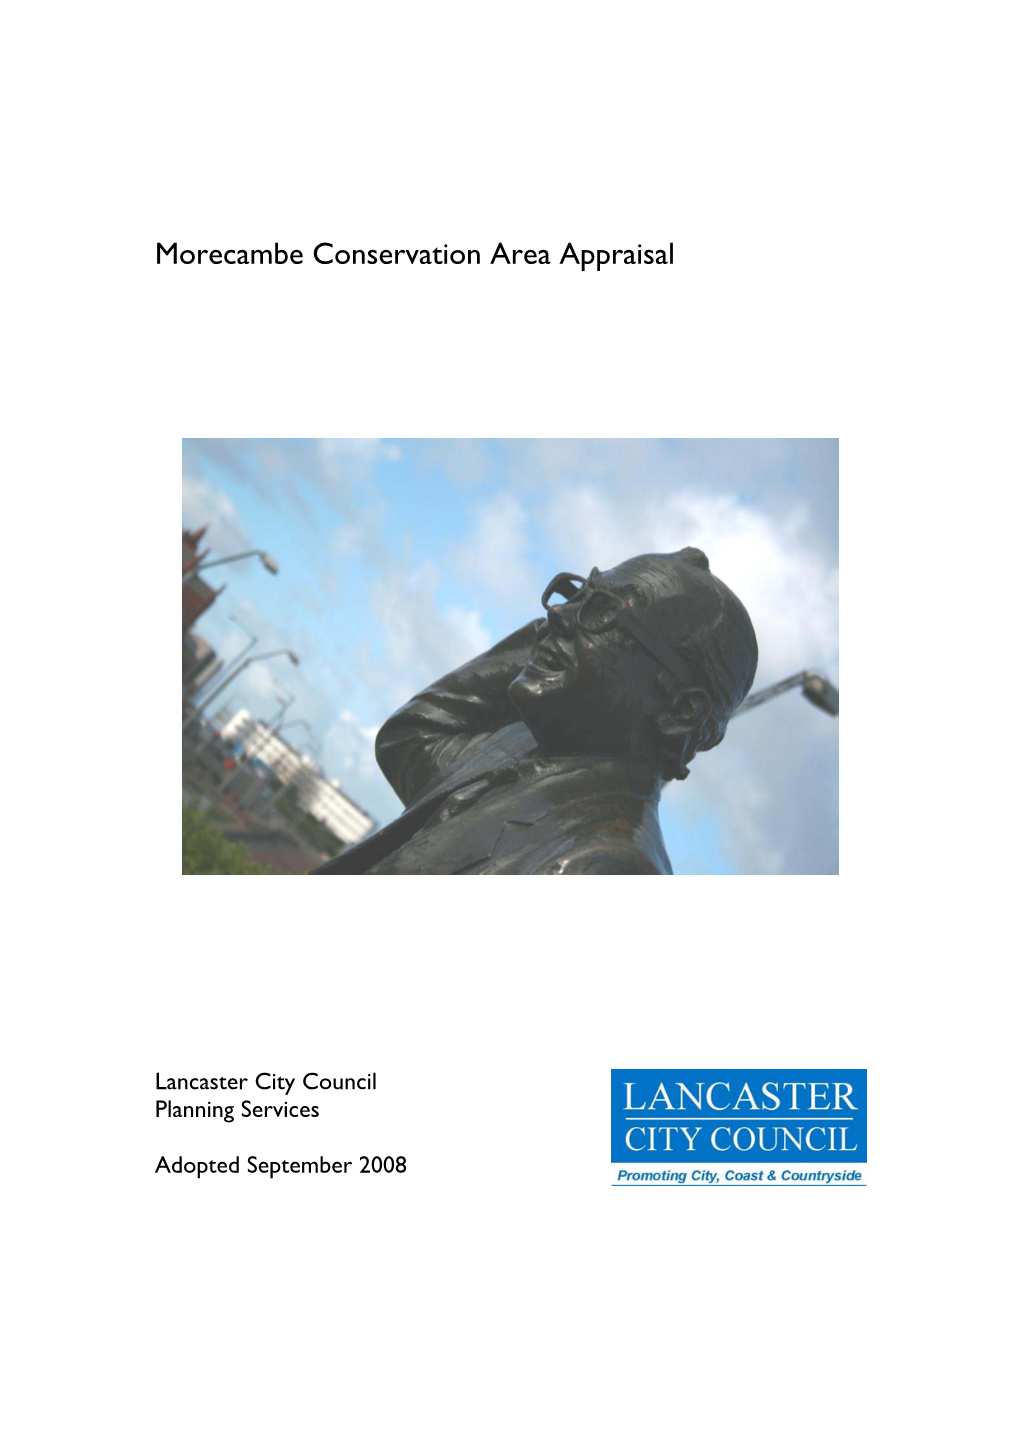 Morecambe Conservation Area Appraisal